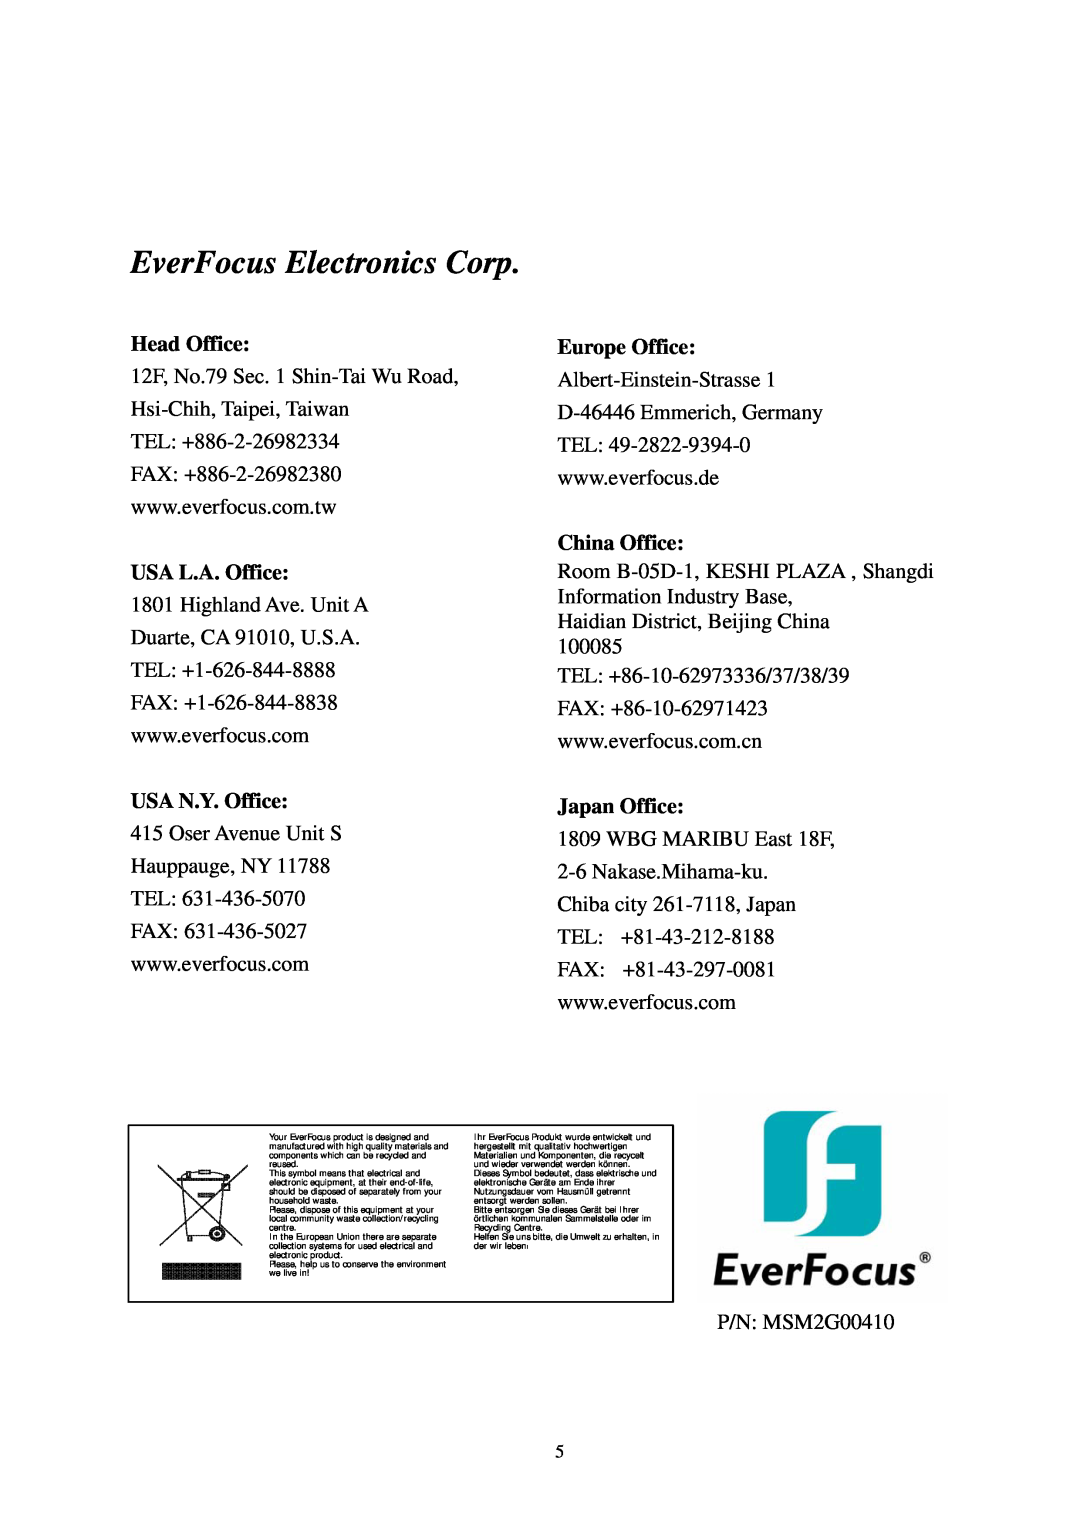 EverFocus Esd200 EverFocus Electronics Corp, Head Office, USA L.A. Office, USA N.Y. Office, Europe Office, China Office 